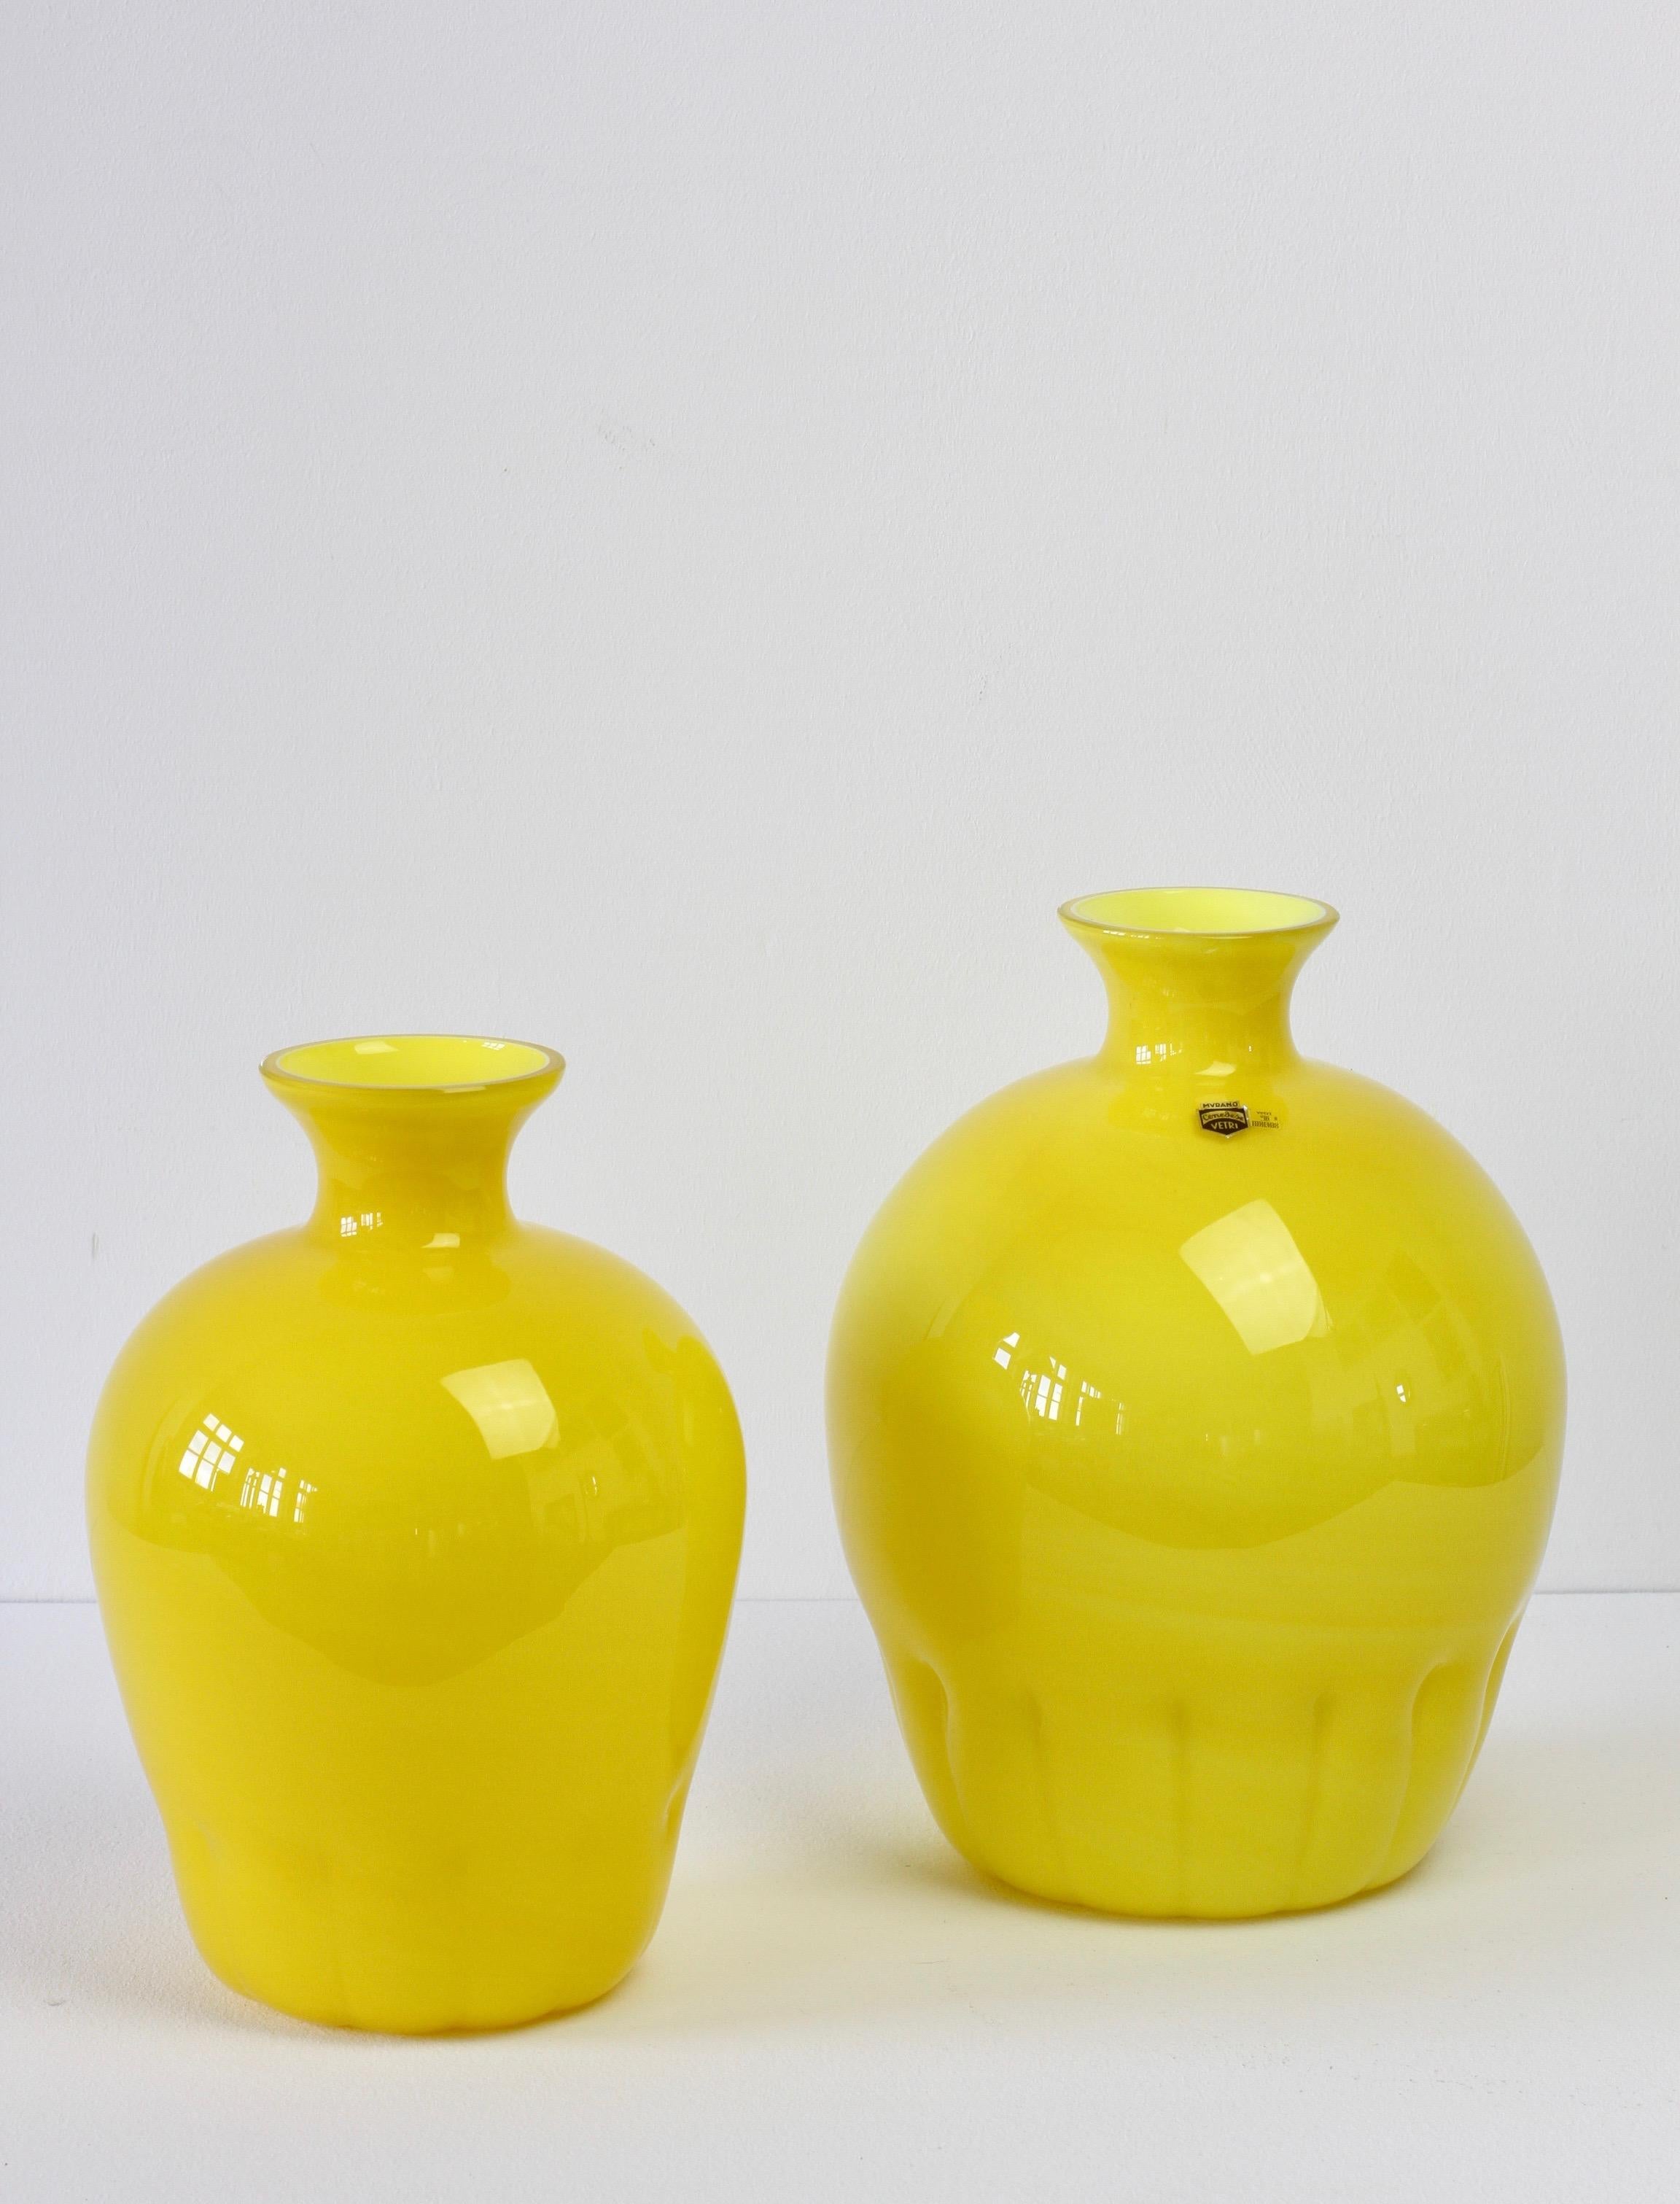 Colorful or colorful pair, group or ensemble of midcentury style bright yellow vases by Cenedese Vetri of Murano, Italy, circa 1990s. Particularly striking is the narrow necked round form with rippled bases, very similar to Napoleone Martinuzzi